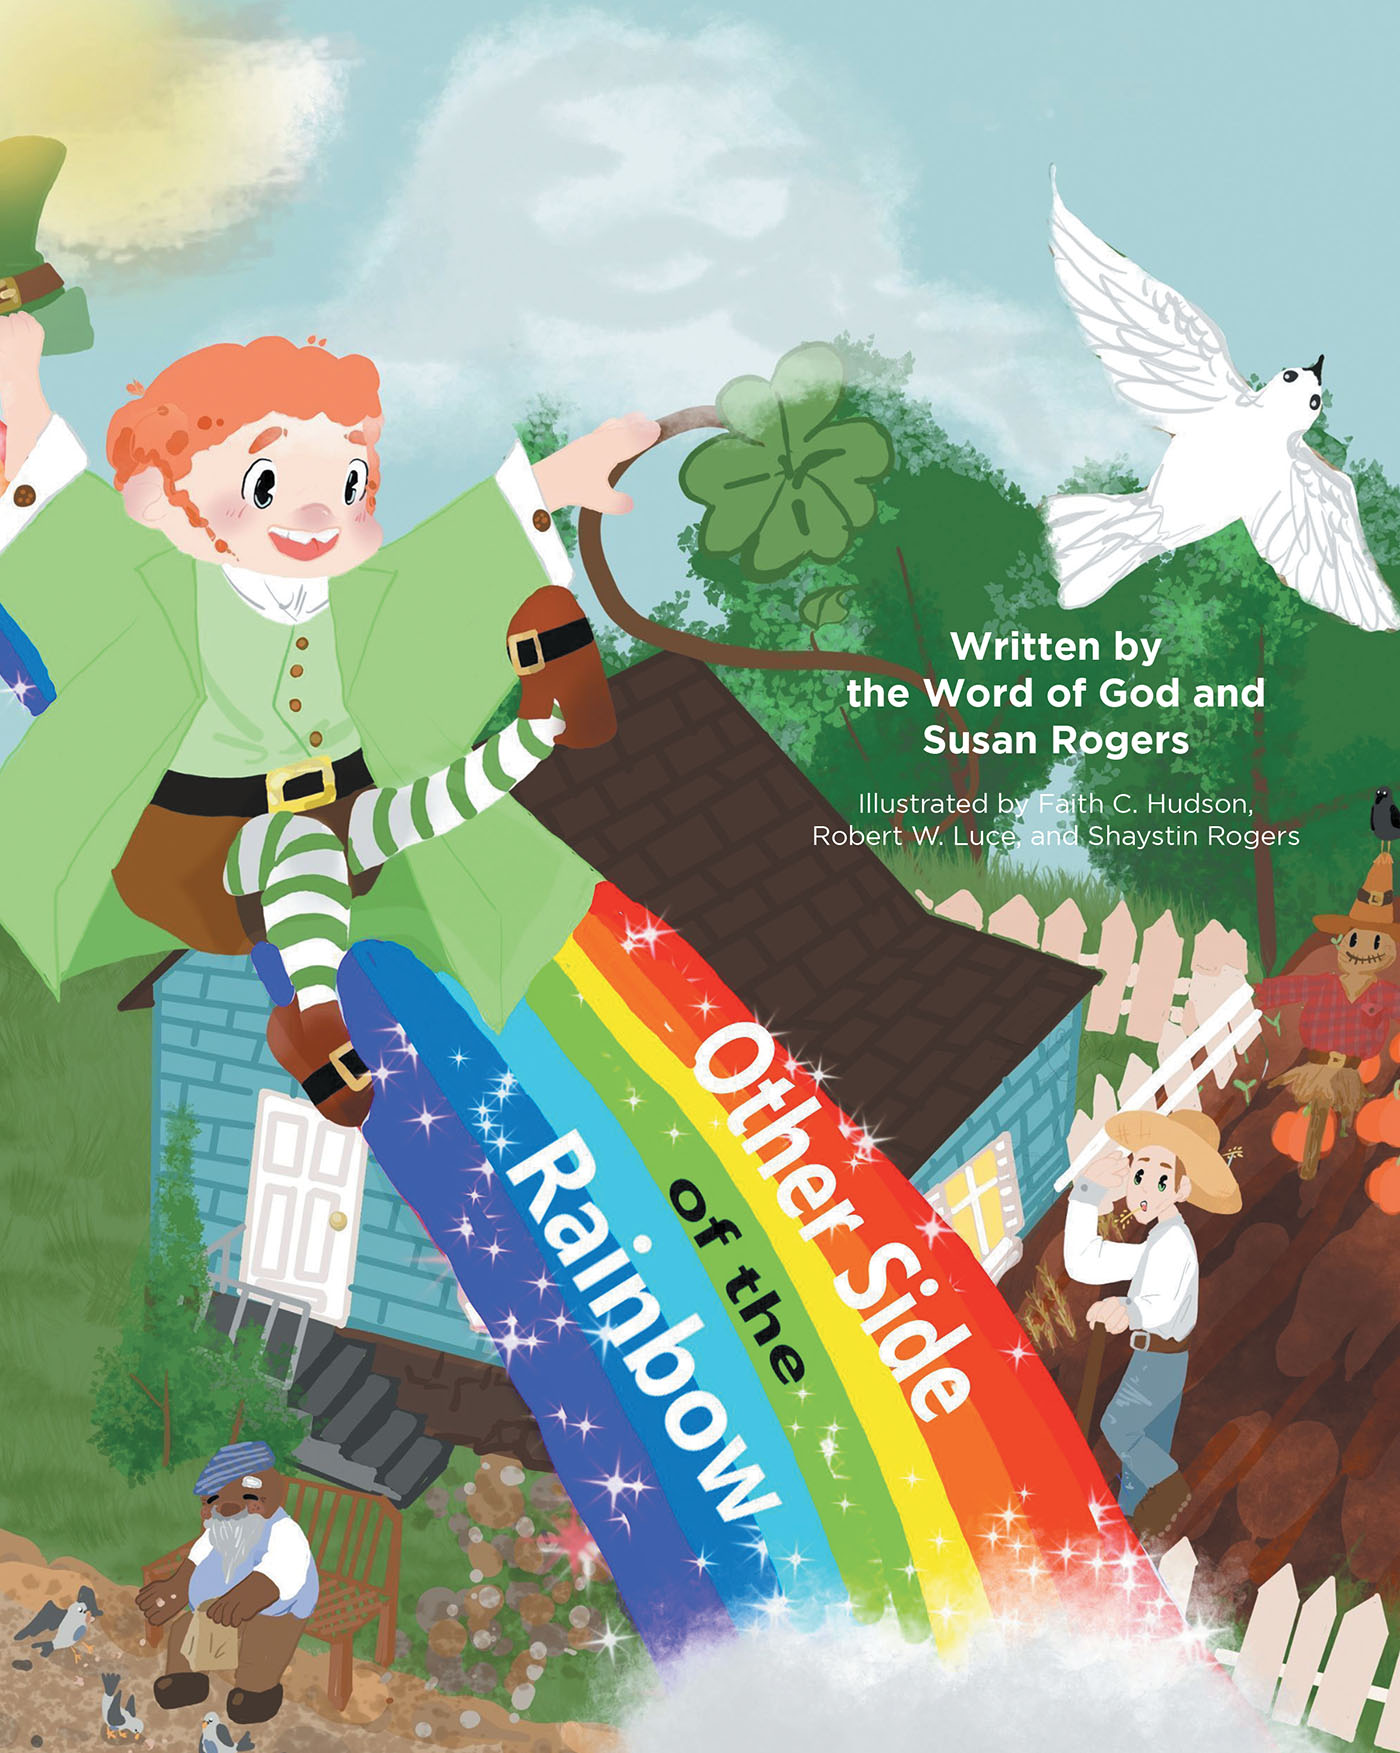 Author Susan Rogers’s New Book, "Other Side of the Rainbow," Tells the Charming Tale of an Enchanted Journey of Finding the True Meaning of the Rainbow